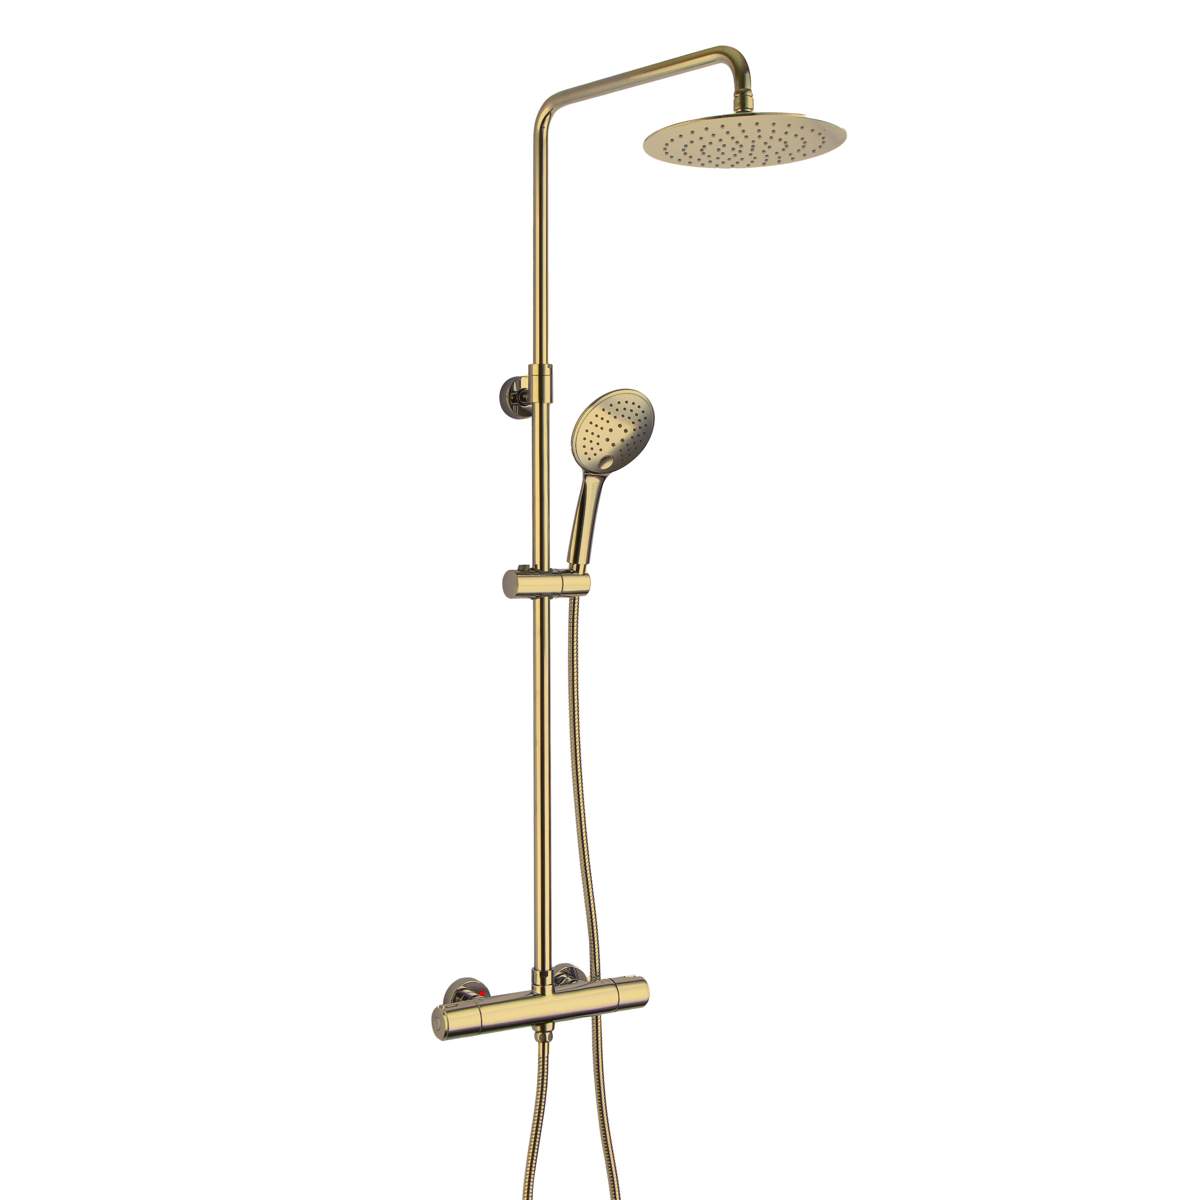 JTP Vos Brushed Brass Thermostatic Bar Valve with 2 Outlets, Adjustable Riser and Cool Touch Shower Kit